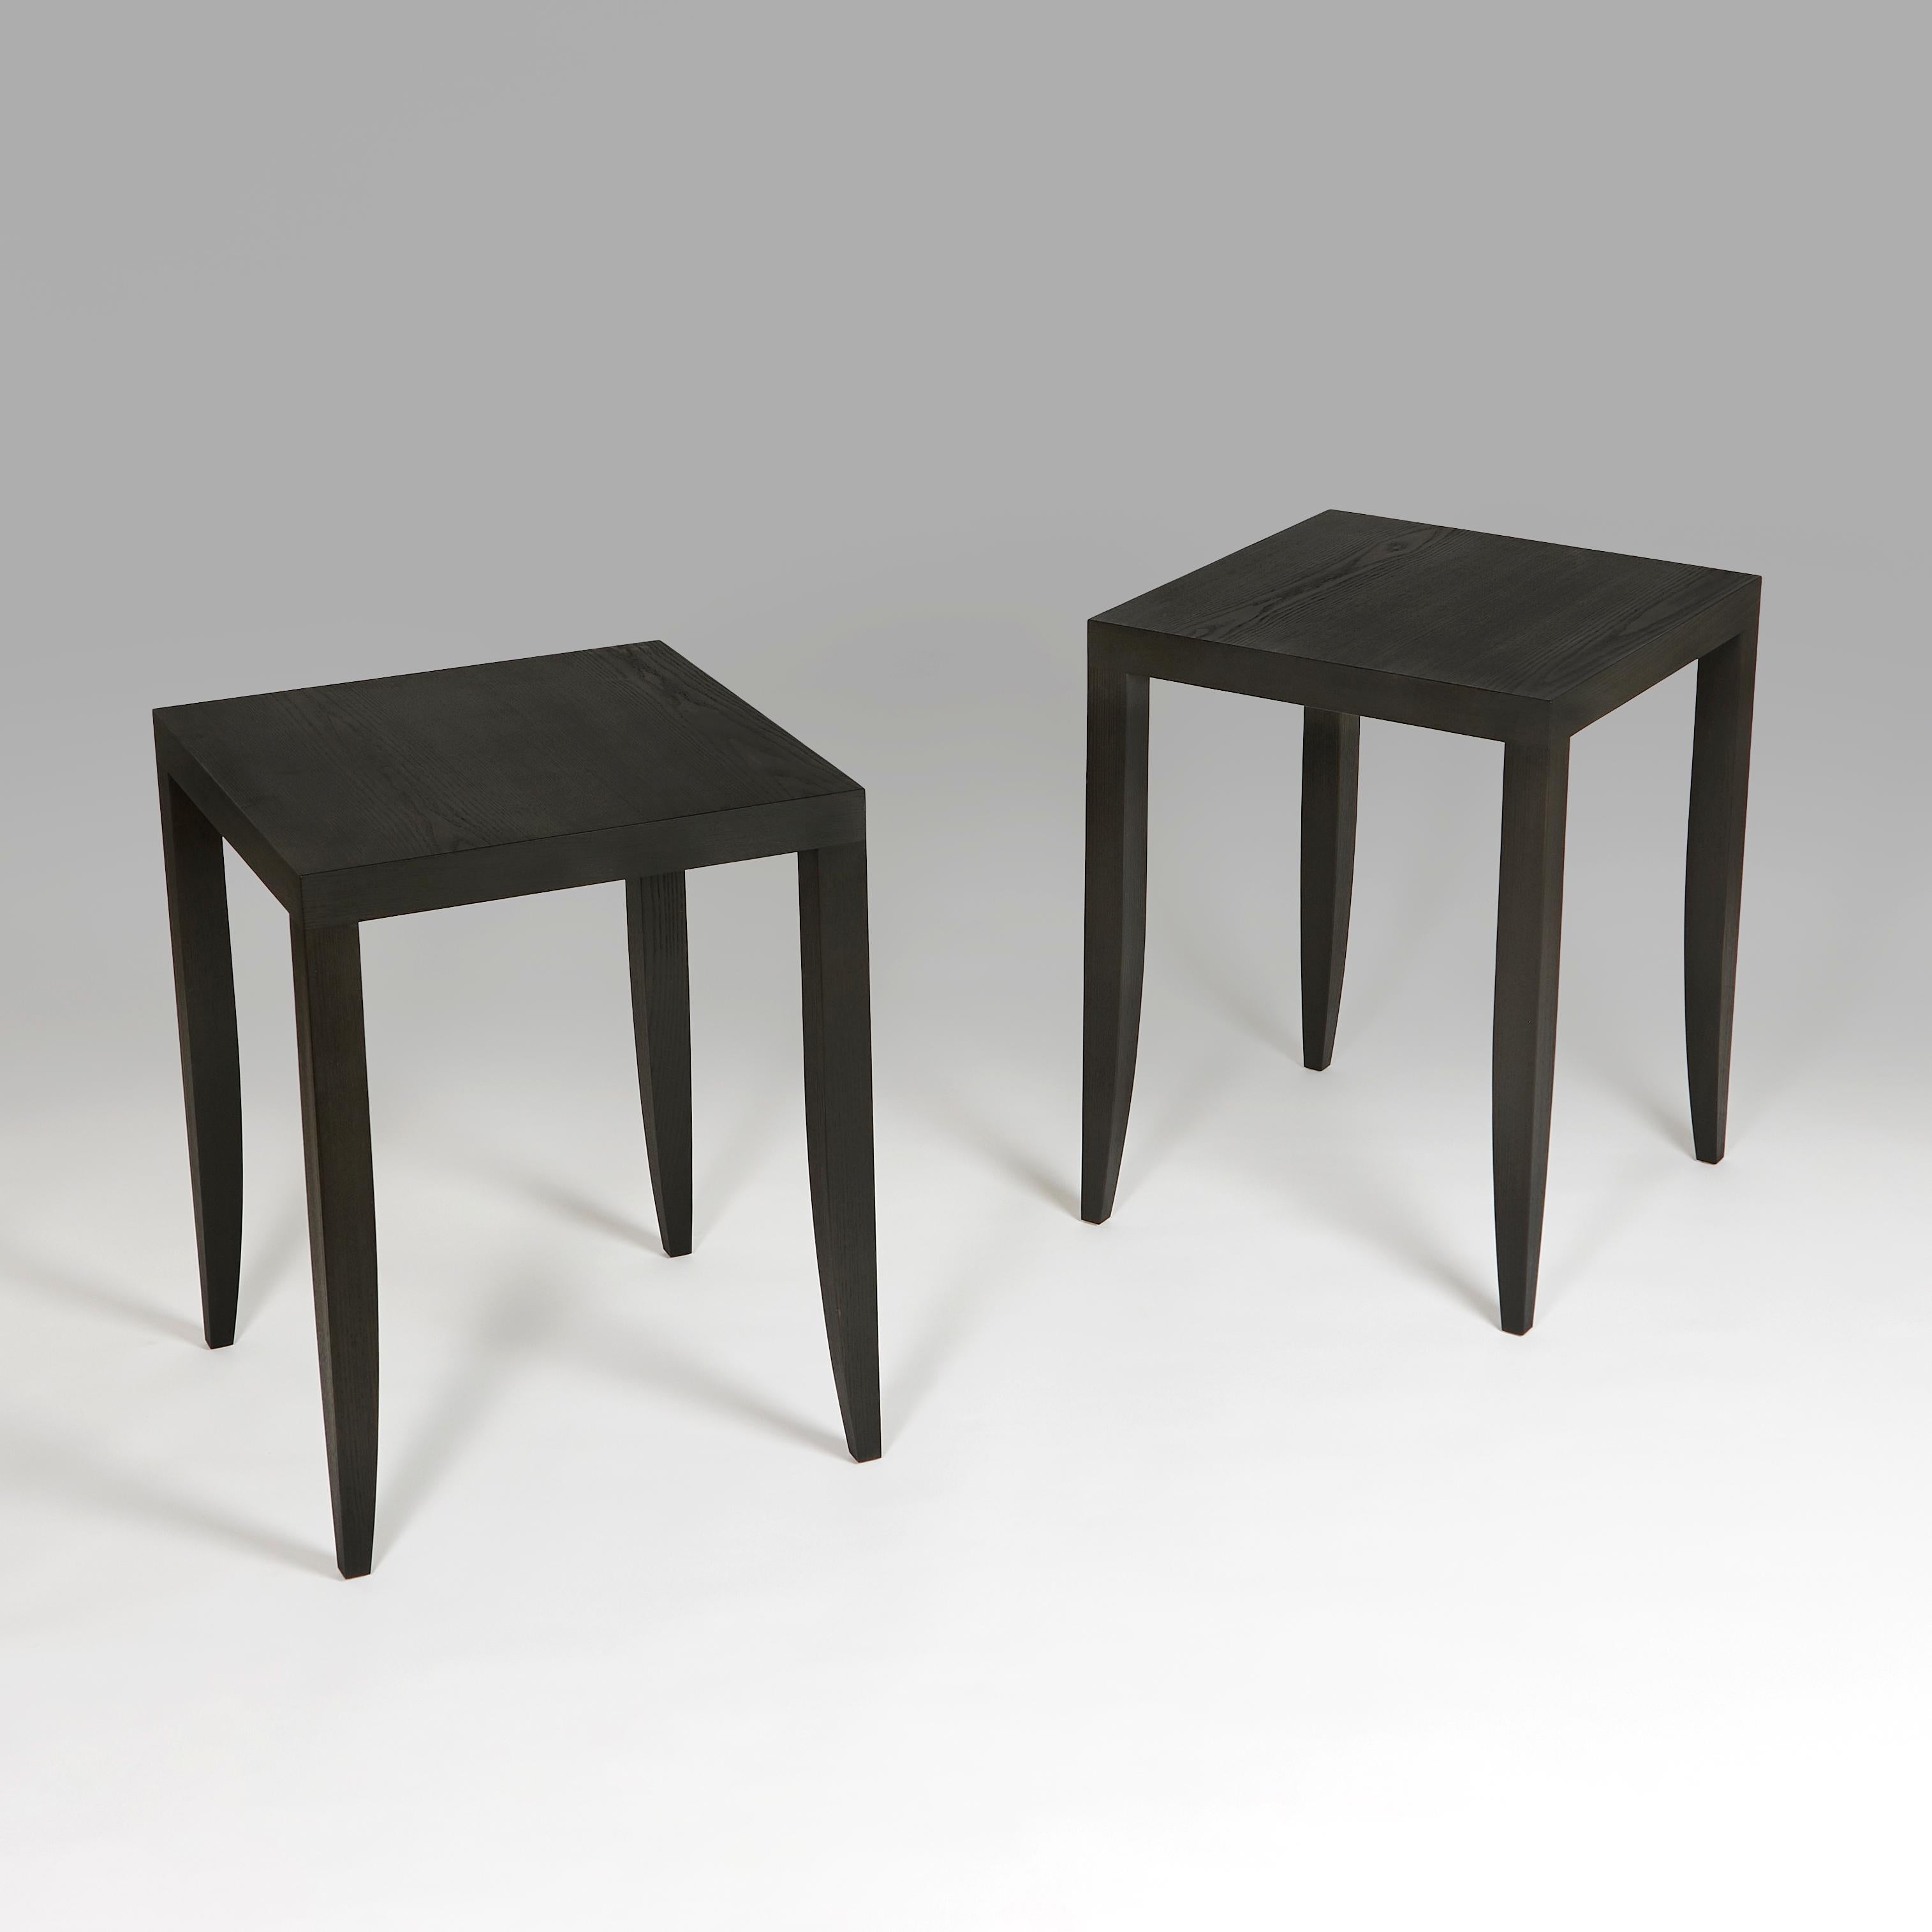 +VAT

England, made to order.

A pair of square occasional tables with tapering legs, made in solid ash with a matte ebonised finish. 

Lead time: 6 - 8 weeks.

Height   61.00cm
Width    47.00cm
Depth    47.00cm        